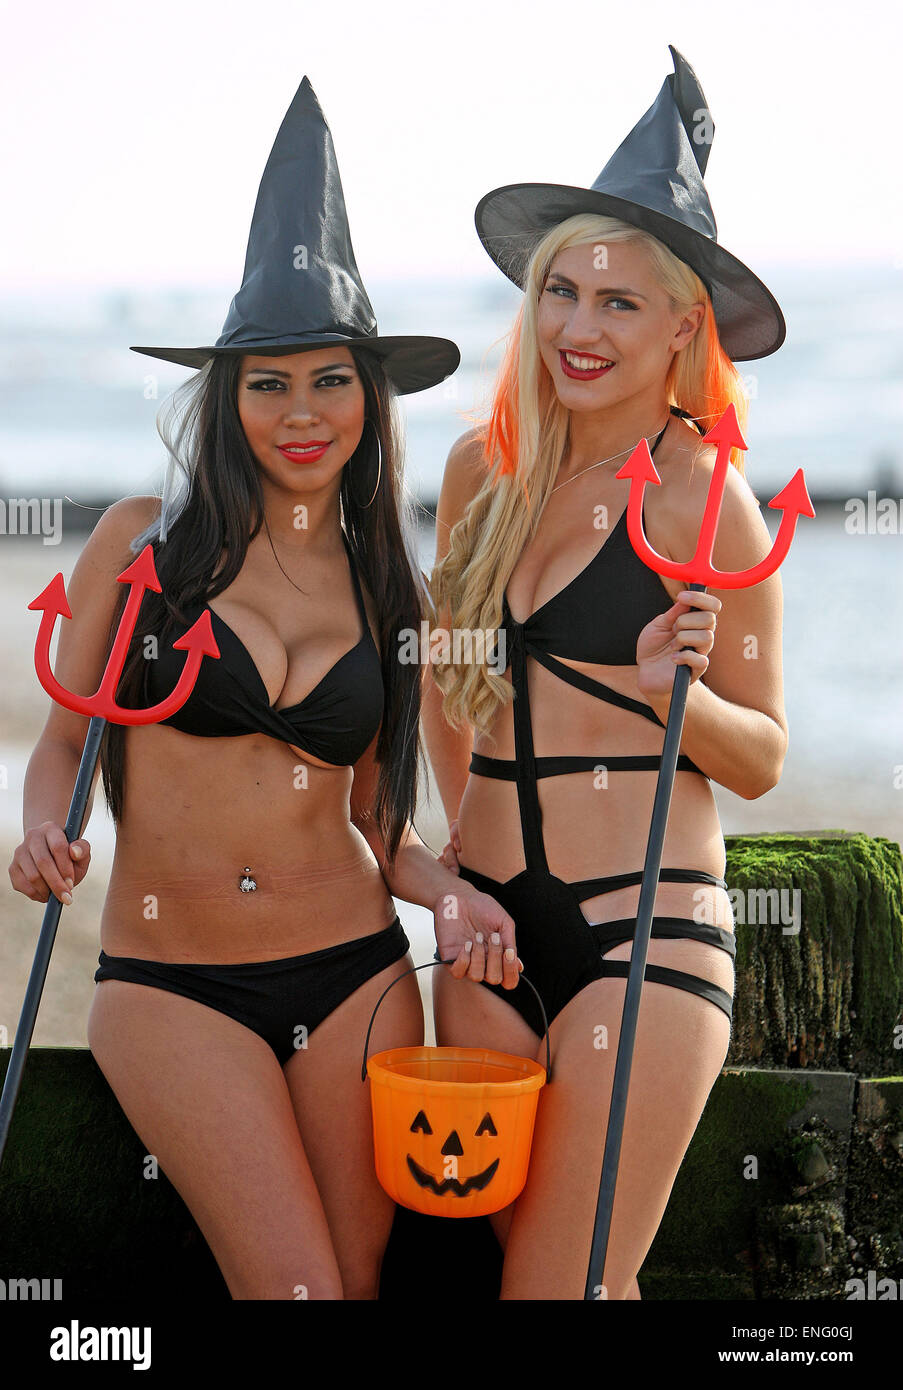 Dancers Sophie Lambert and Stephany Paredes pose together on Southend beach, wearing skimpy Halloween outfits.  Featuring: Stephany Paredes,Sophie Lambert Where: Southend, United Kingdom When: 31 Oct 2014 Stock Photo